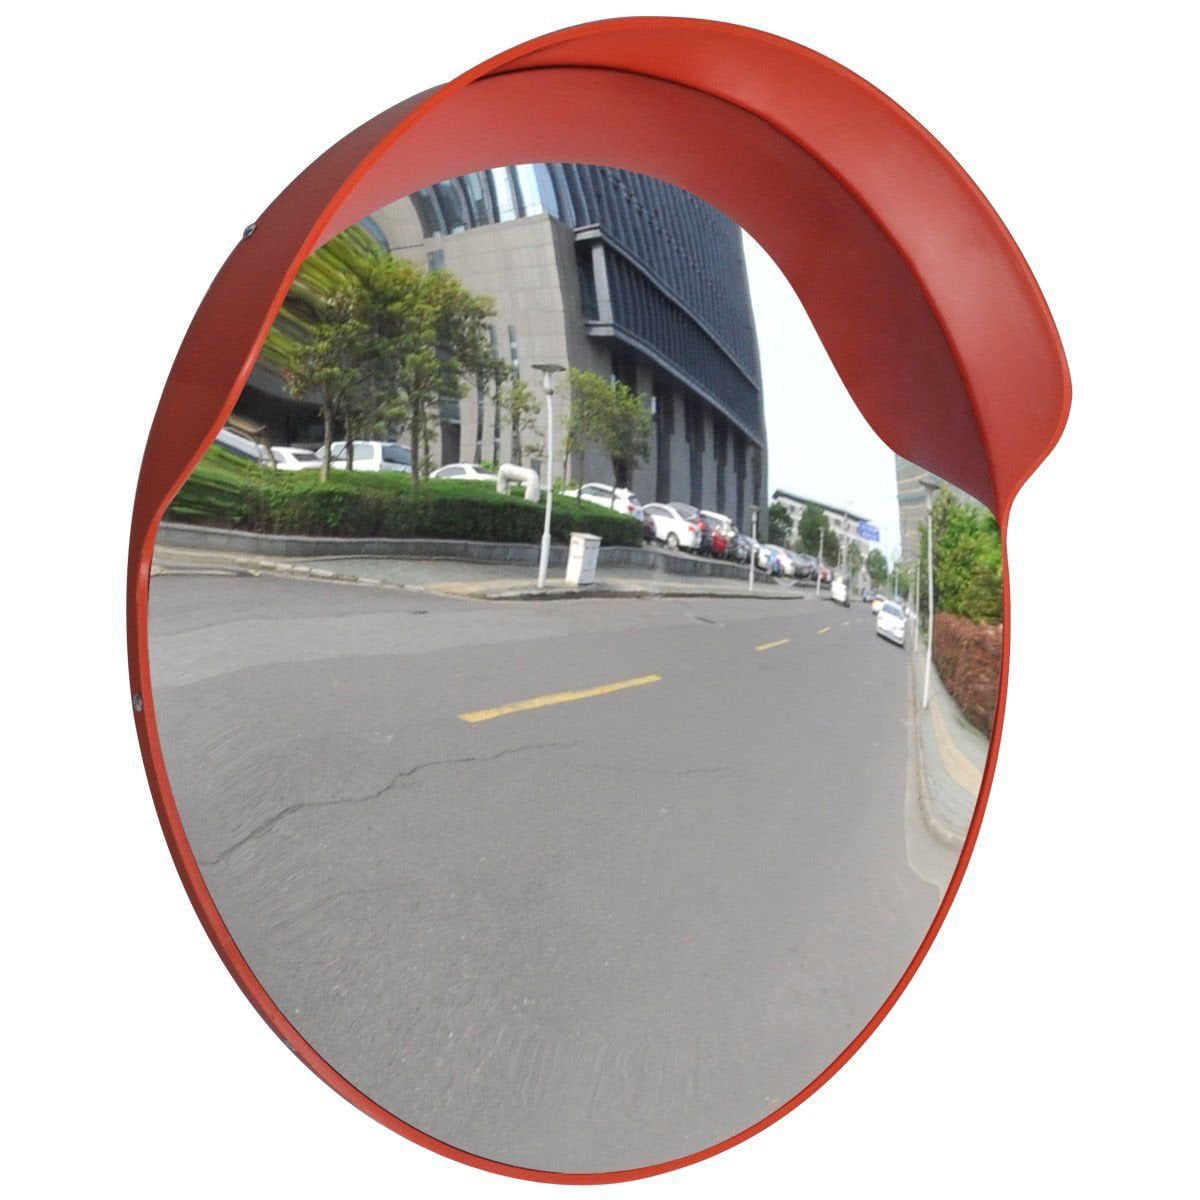 12-inch Convex Mirror Clear View Driveway Park Assistant Curved Security Mirror 